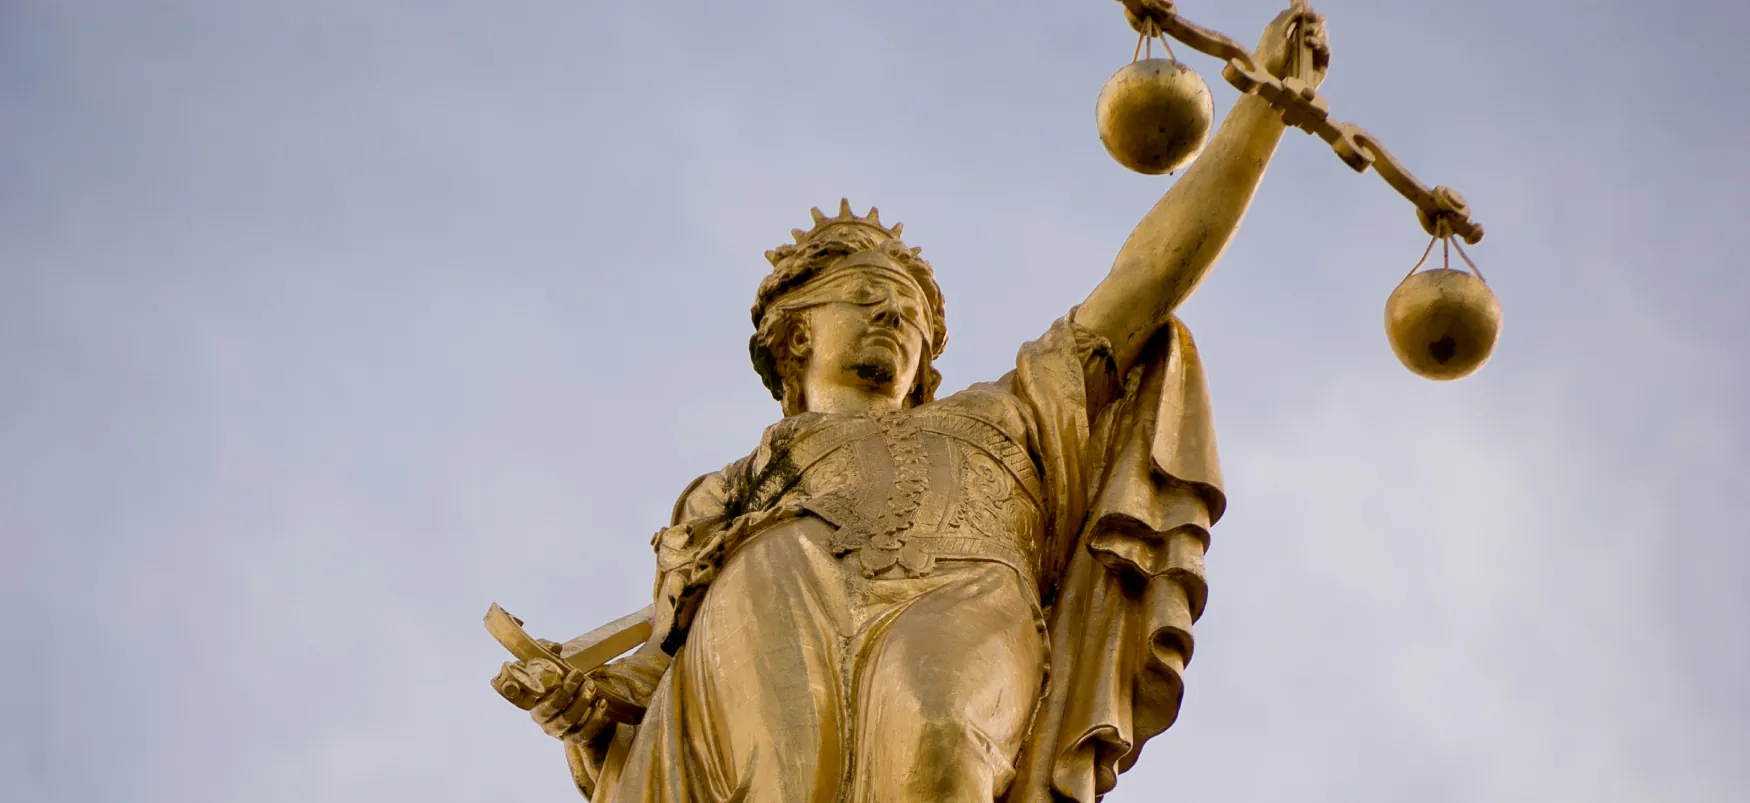 In a golden statue Lady Justice is blindfolded. In one hand she holds a balanced scale, and in the other hand she holds a sword tucked under her arm.